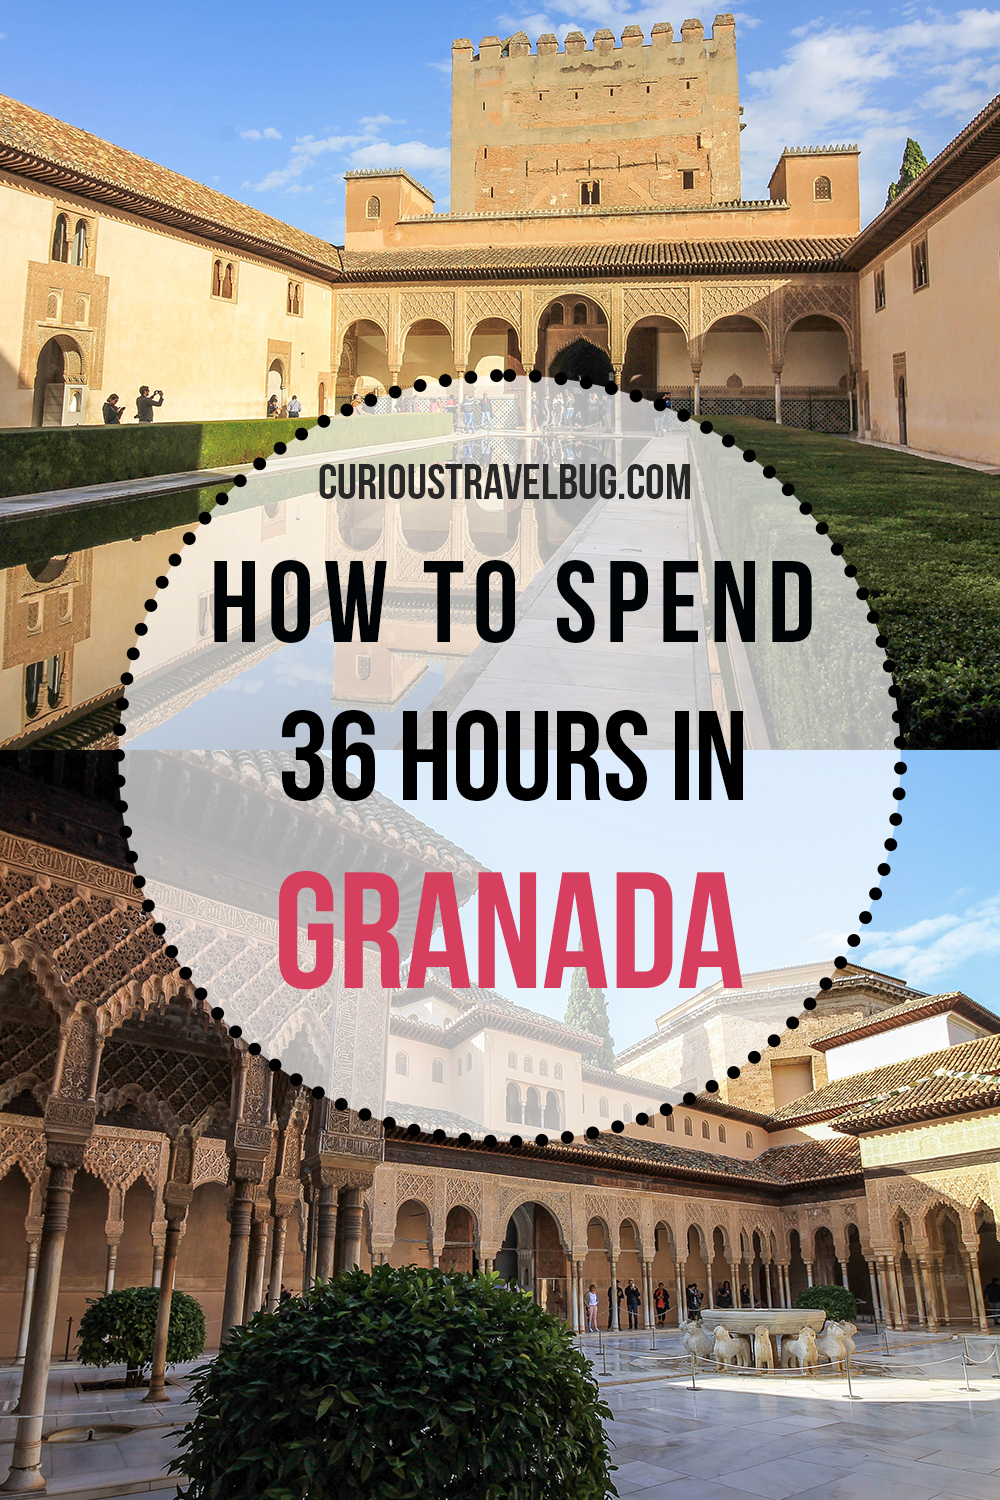 In just 36 hours you can see all the top sights of the city of Granada, Spain including the Alhambra and neighborhoods like the Albayzin. This complete guide also includes where to stay, how to get around Granada as well as nearby day trips to make this your best vacation ever.